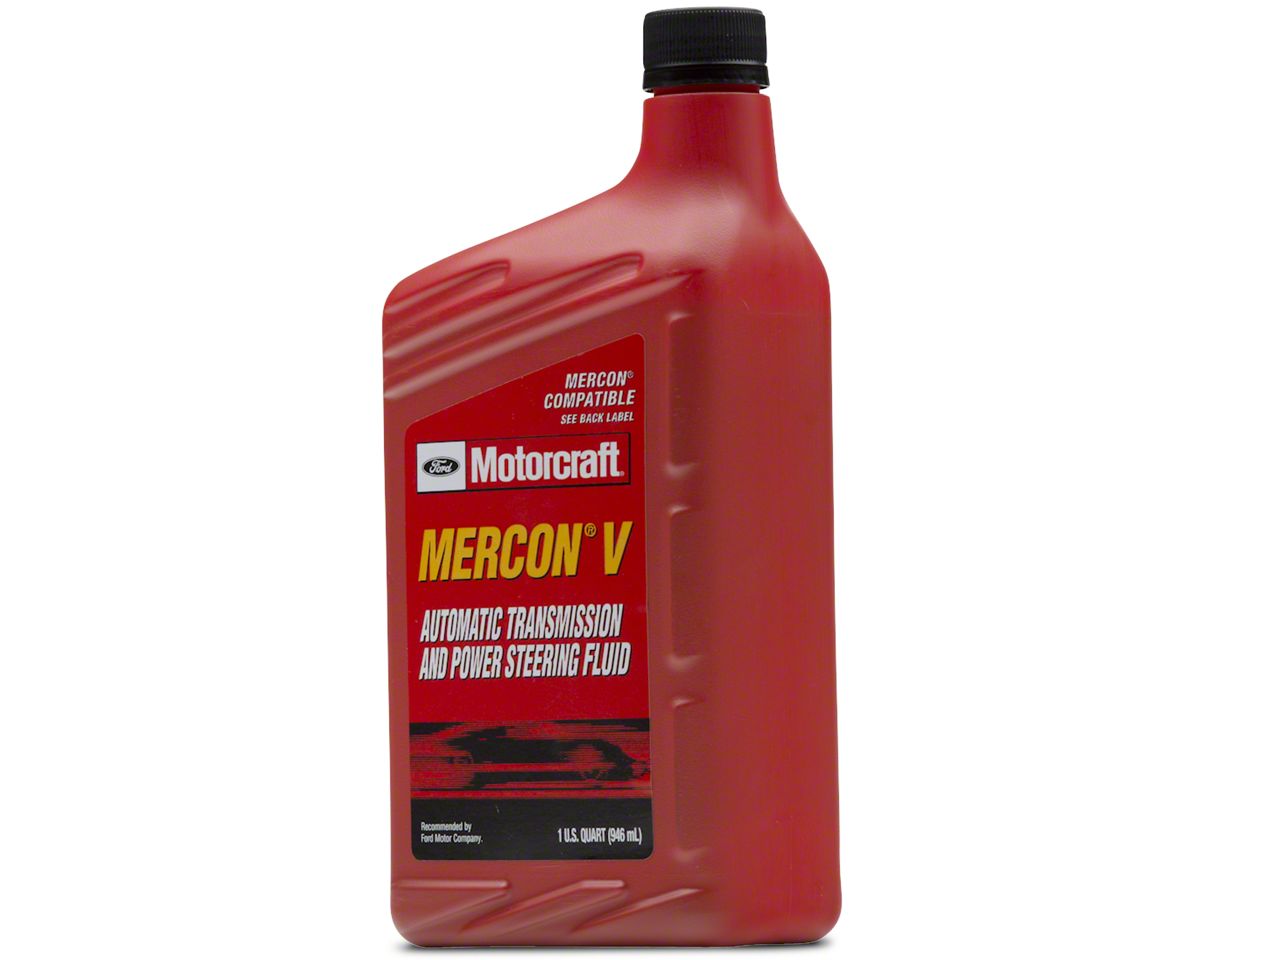 Automatic Transmission Fluid-Mercon Lv - 55 Gallon Drum fits 20-21 Ford  Mustang